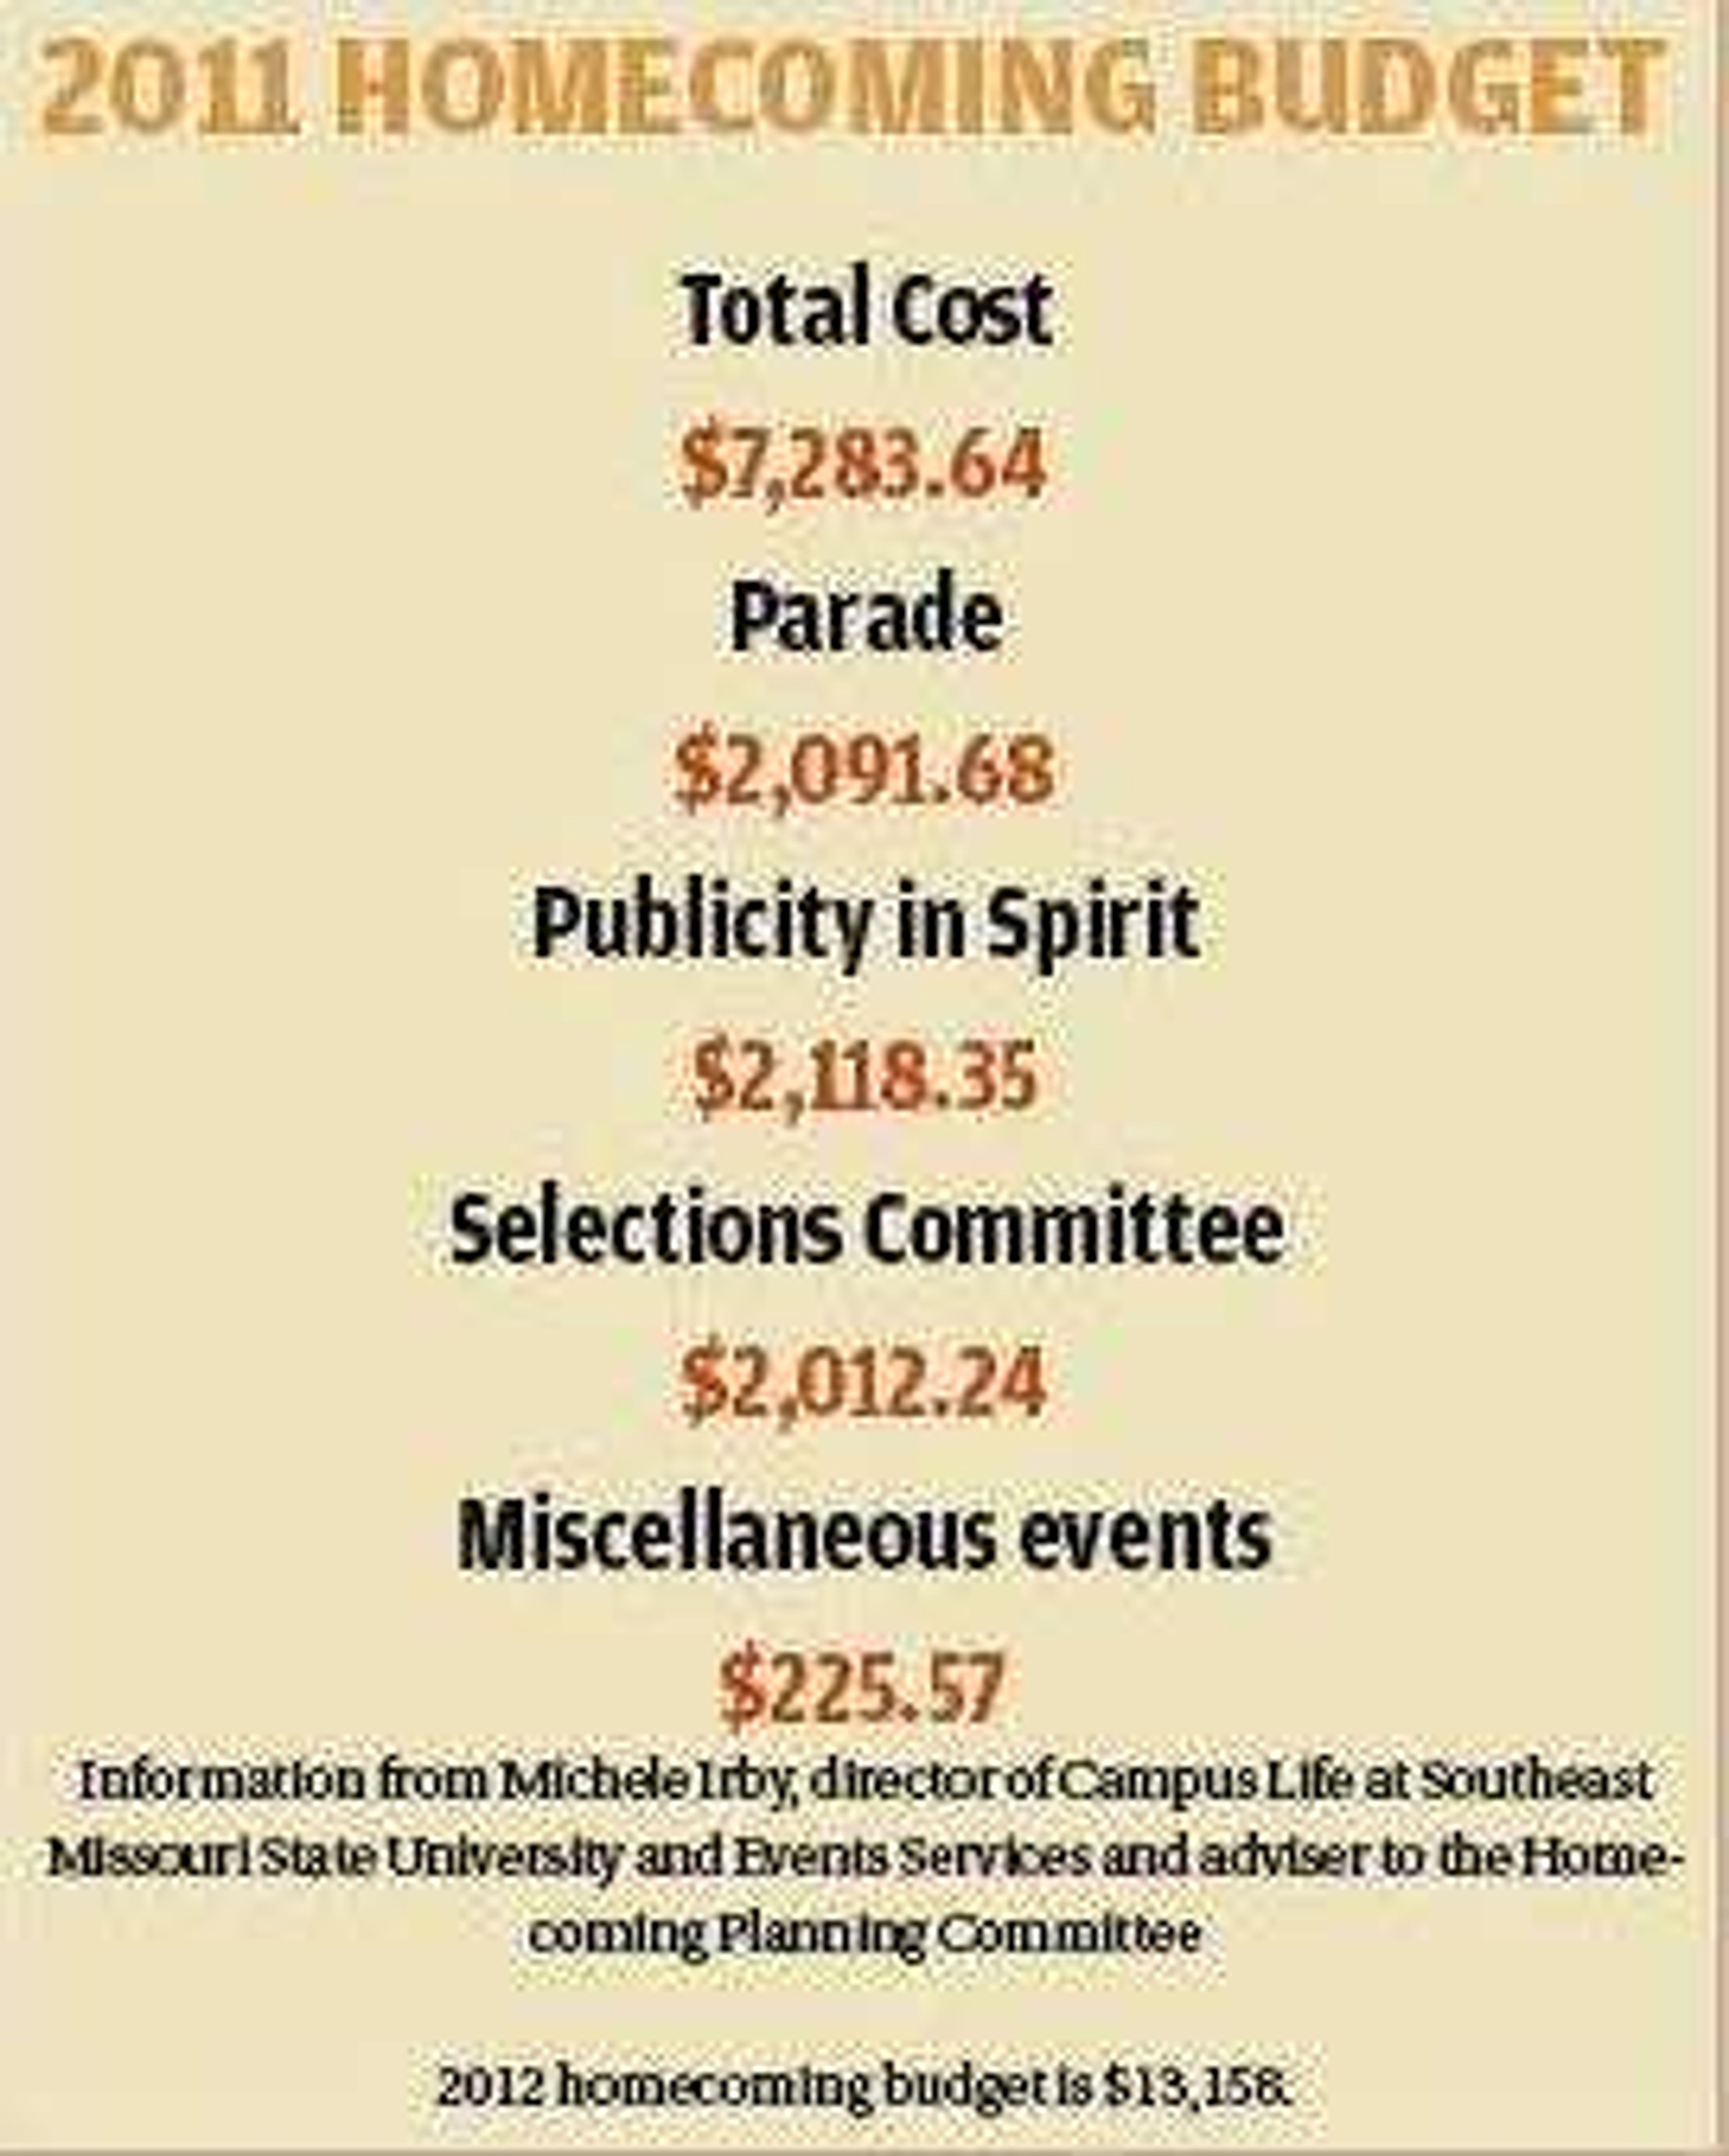 Student fees pay for events run by the Homecoming Planning Committee